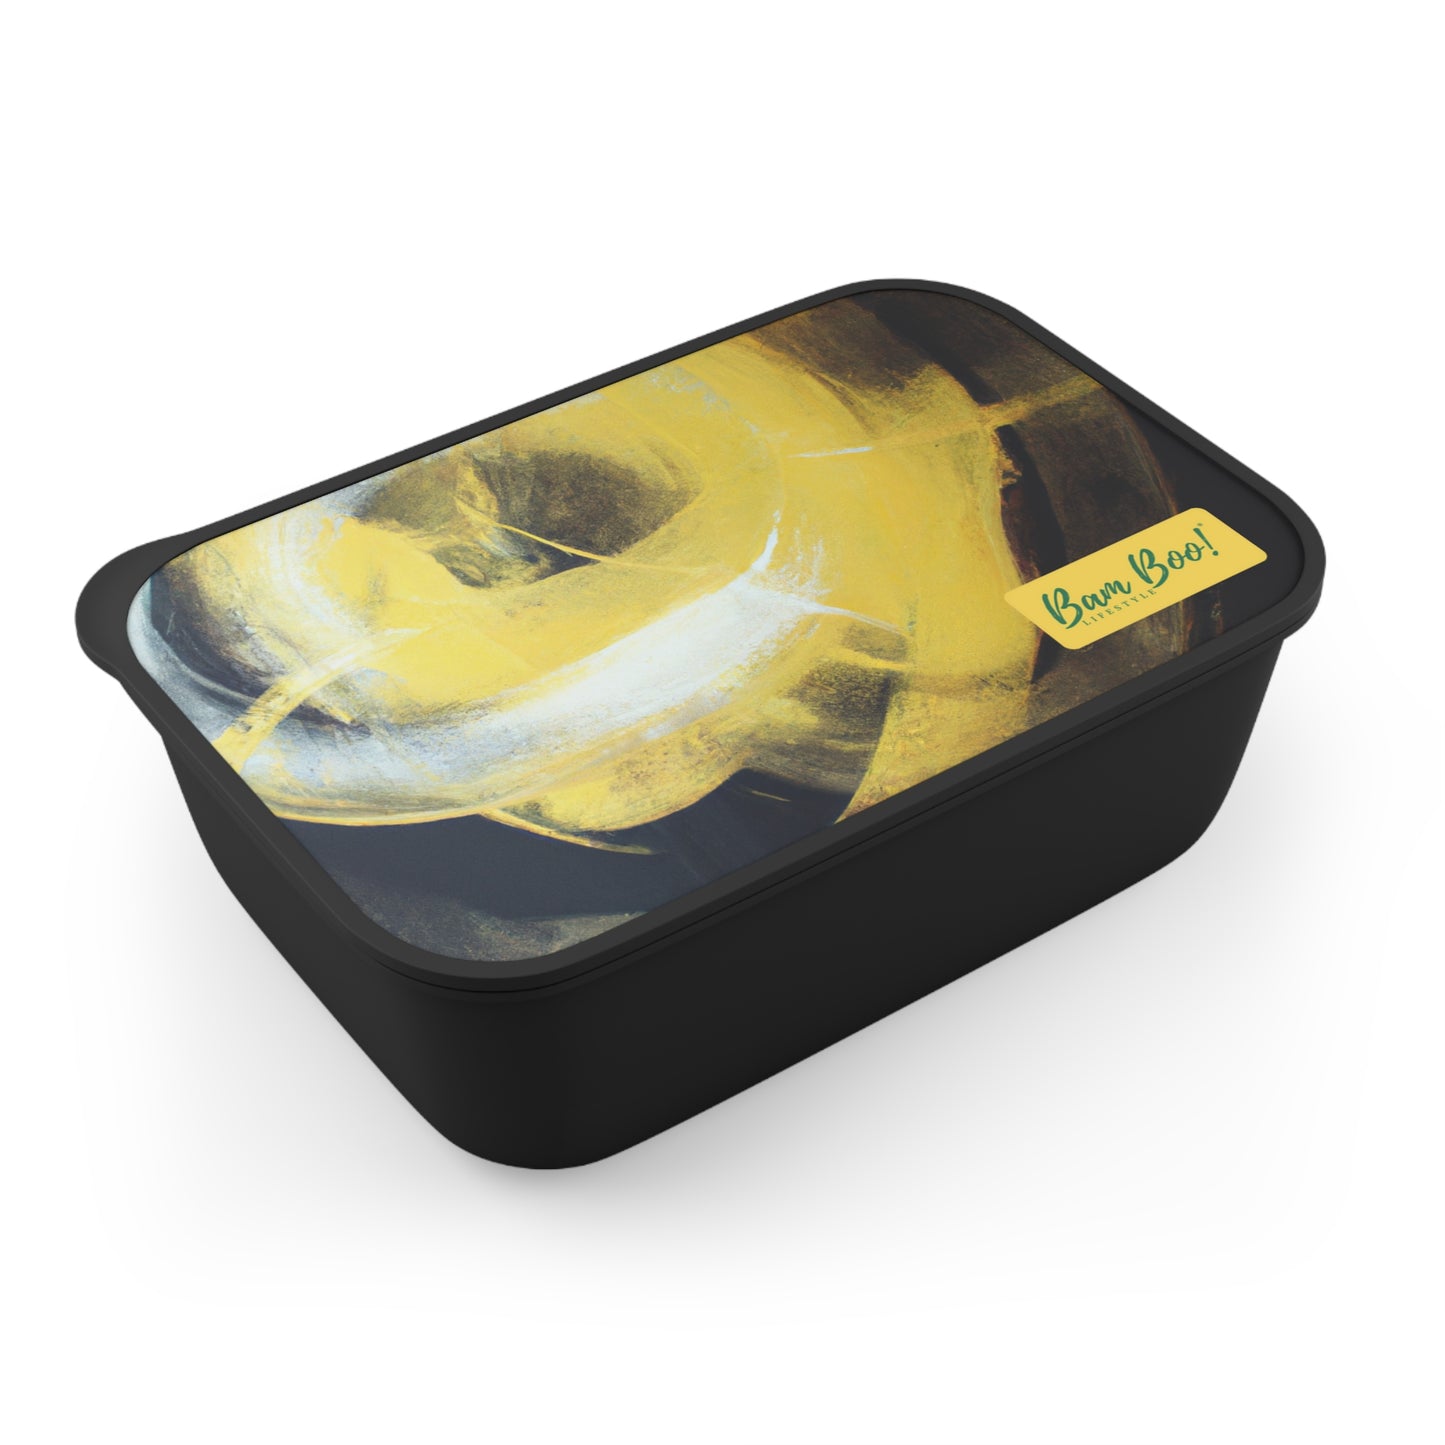 "Flowing Luminance: Painting the Beauty of Nature" - Bam Boo! Lifestyle Eco-friendly PLA Bento Box with Band and Utensils